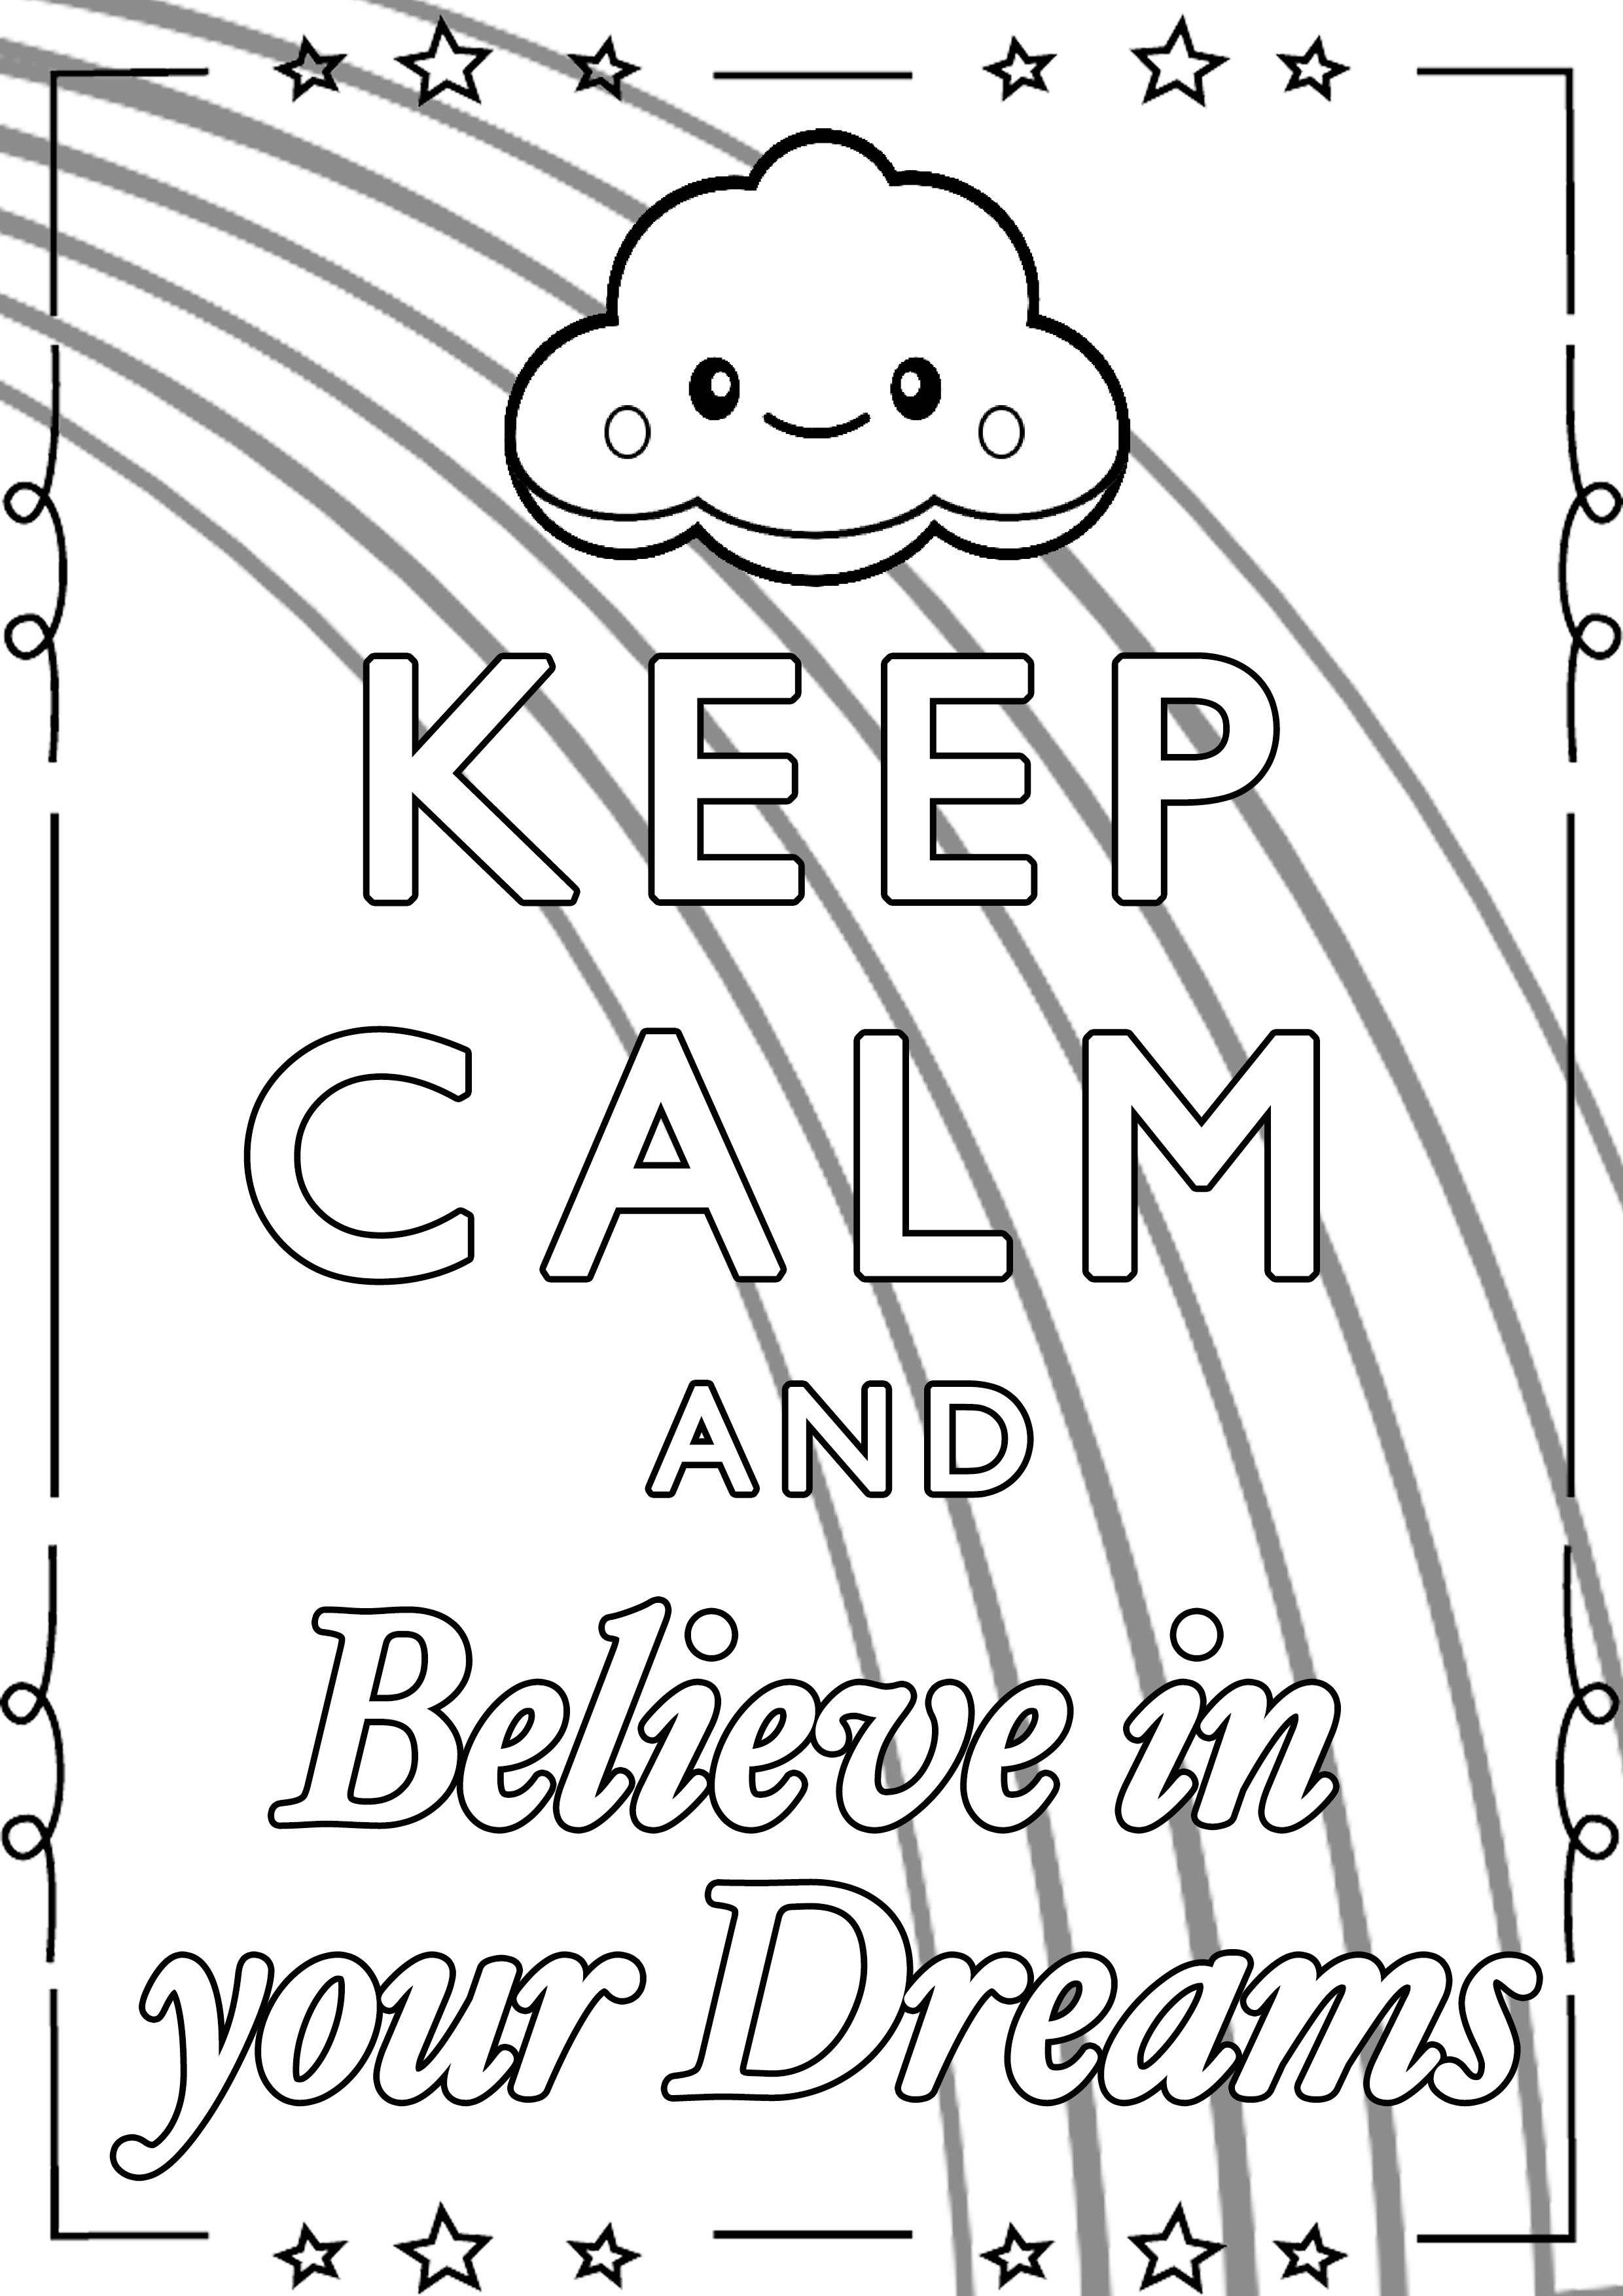 Keep Calm and Believe in your Dreams : It's important te be selfconfident ... A cloud and a rainbow will help you